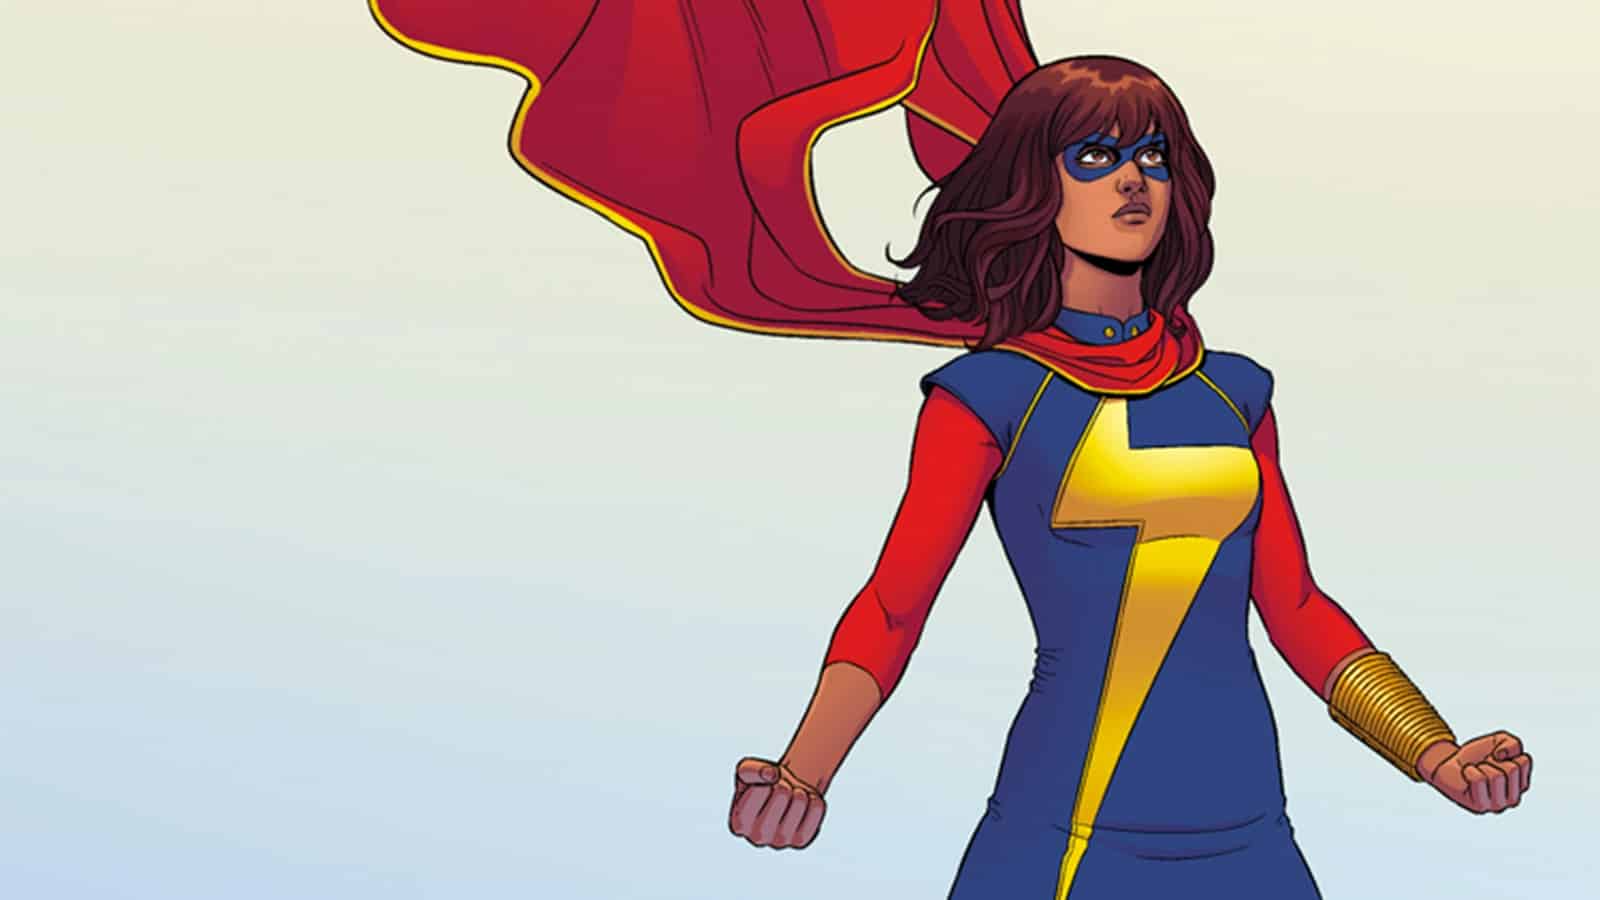 Ms Marvel stands proud in her comic